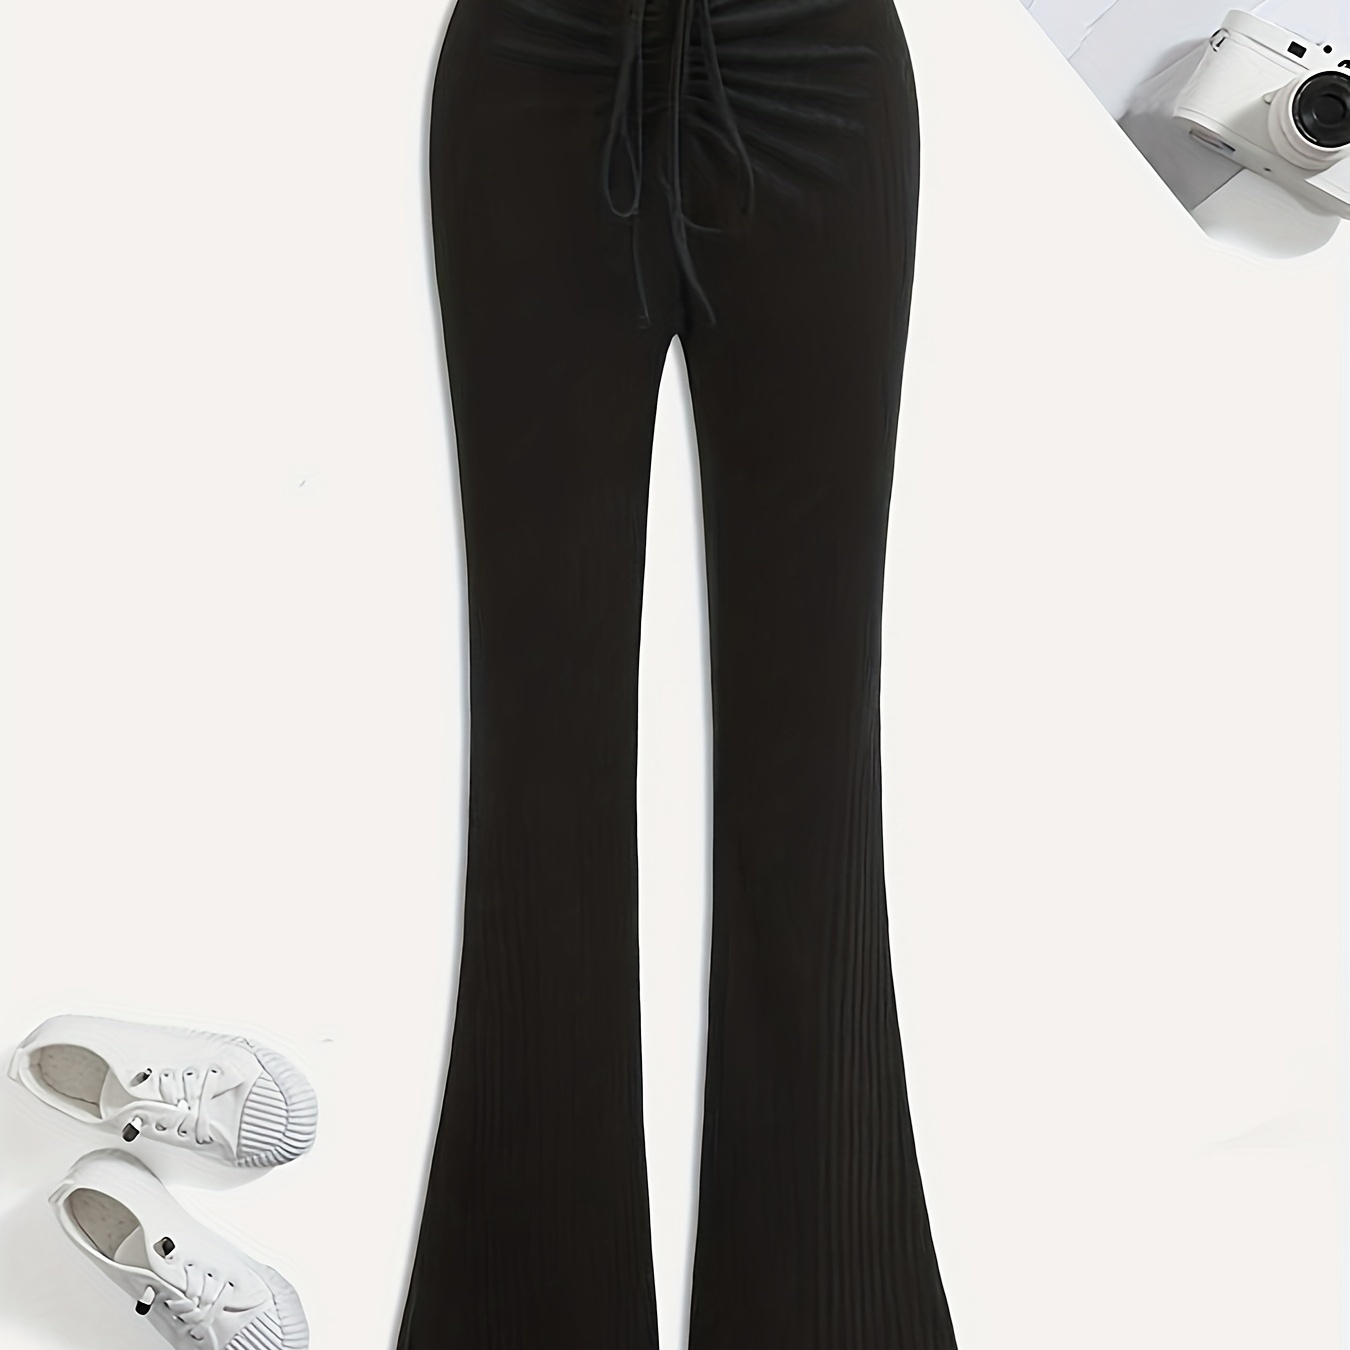 Girls Casual Ruched Details High Waist Slim Fit Knit Flare Leg Pants